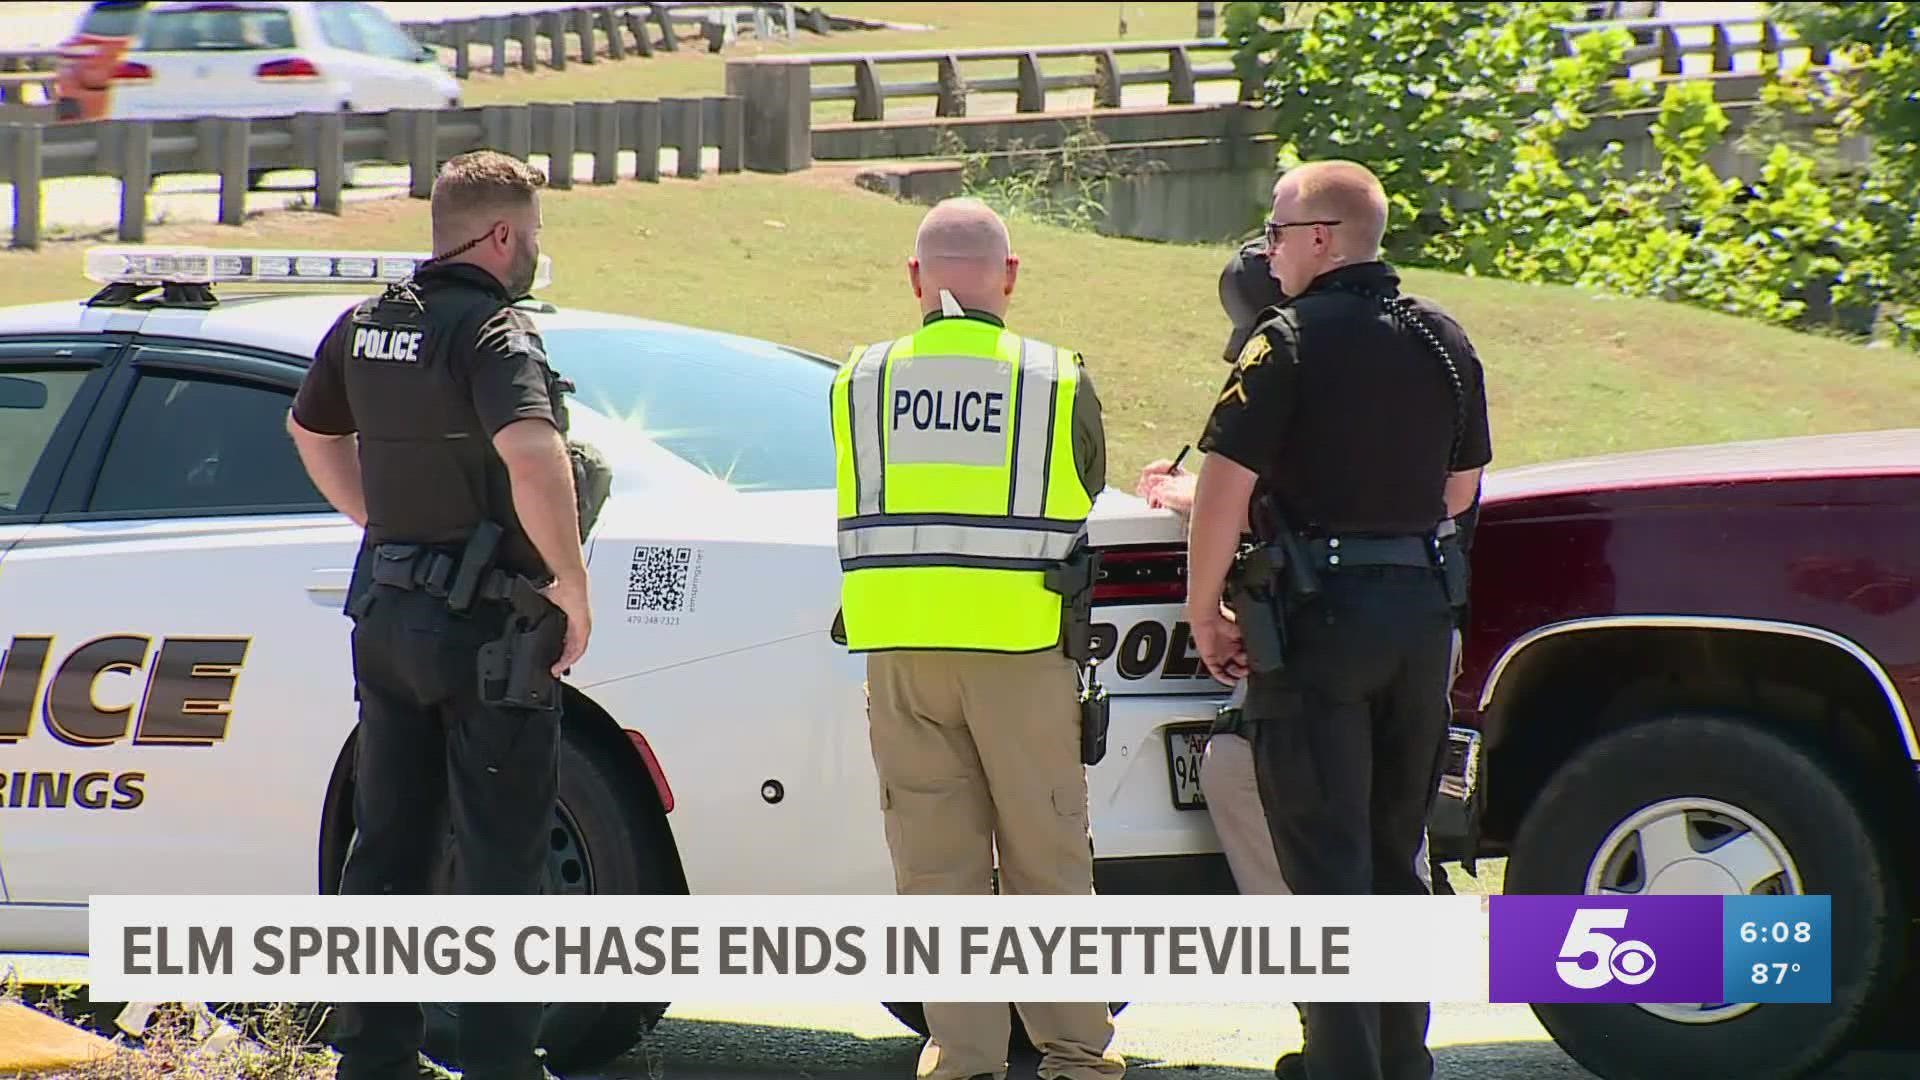 According to investigators, the chase began in Elm Springs and ended in Fayetteville.